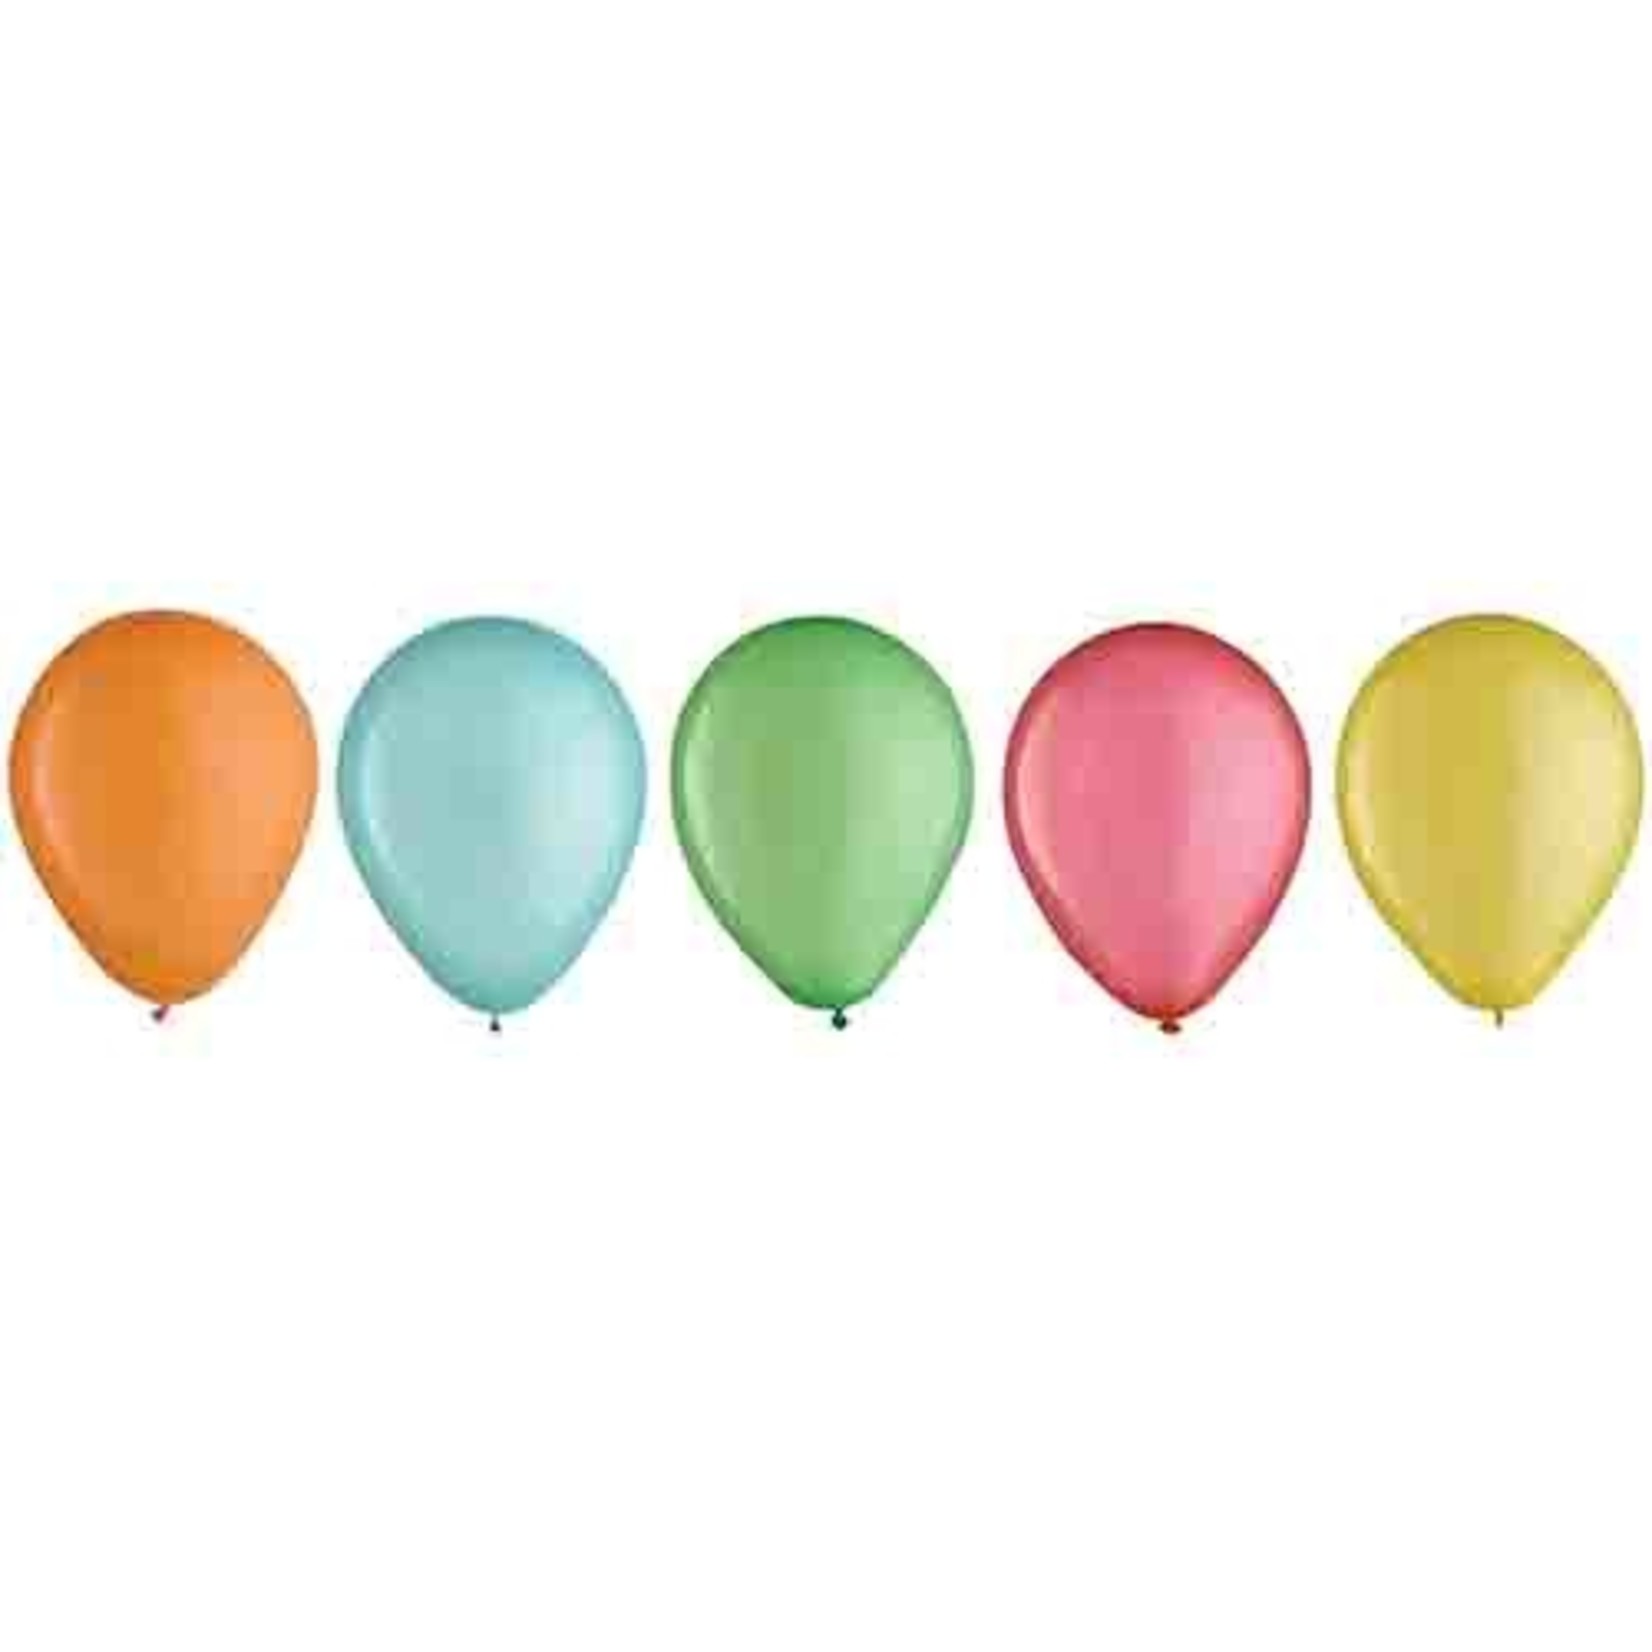 Amscan 5" Sherbet Color Assorted Latex Balloons - 25ct.